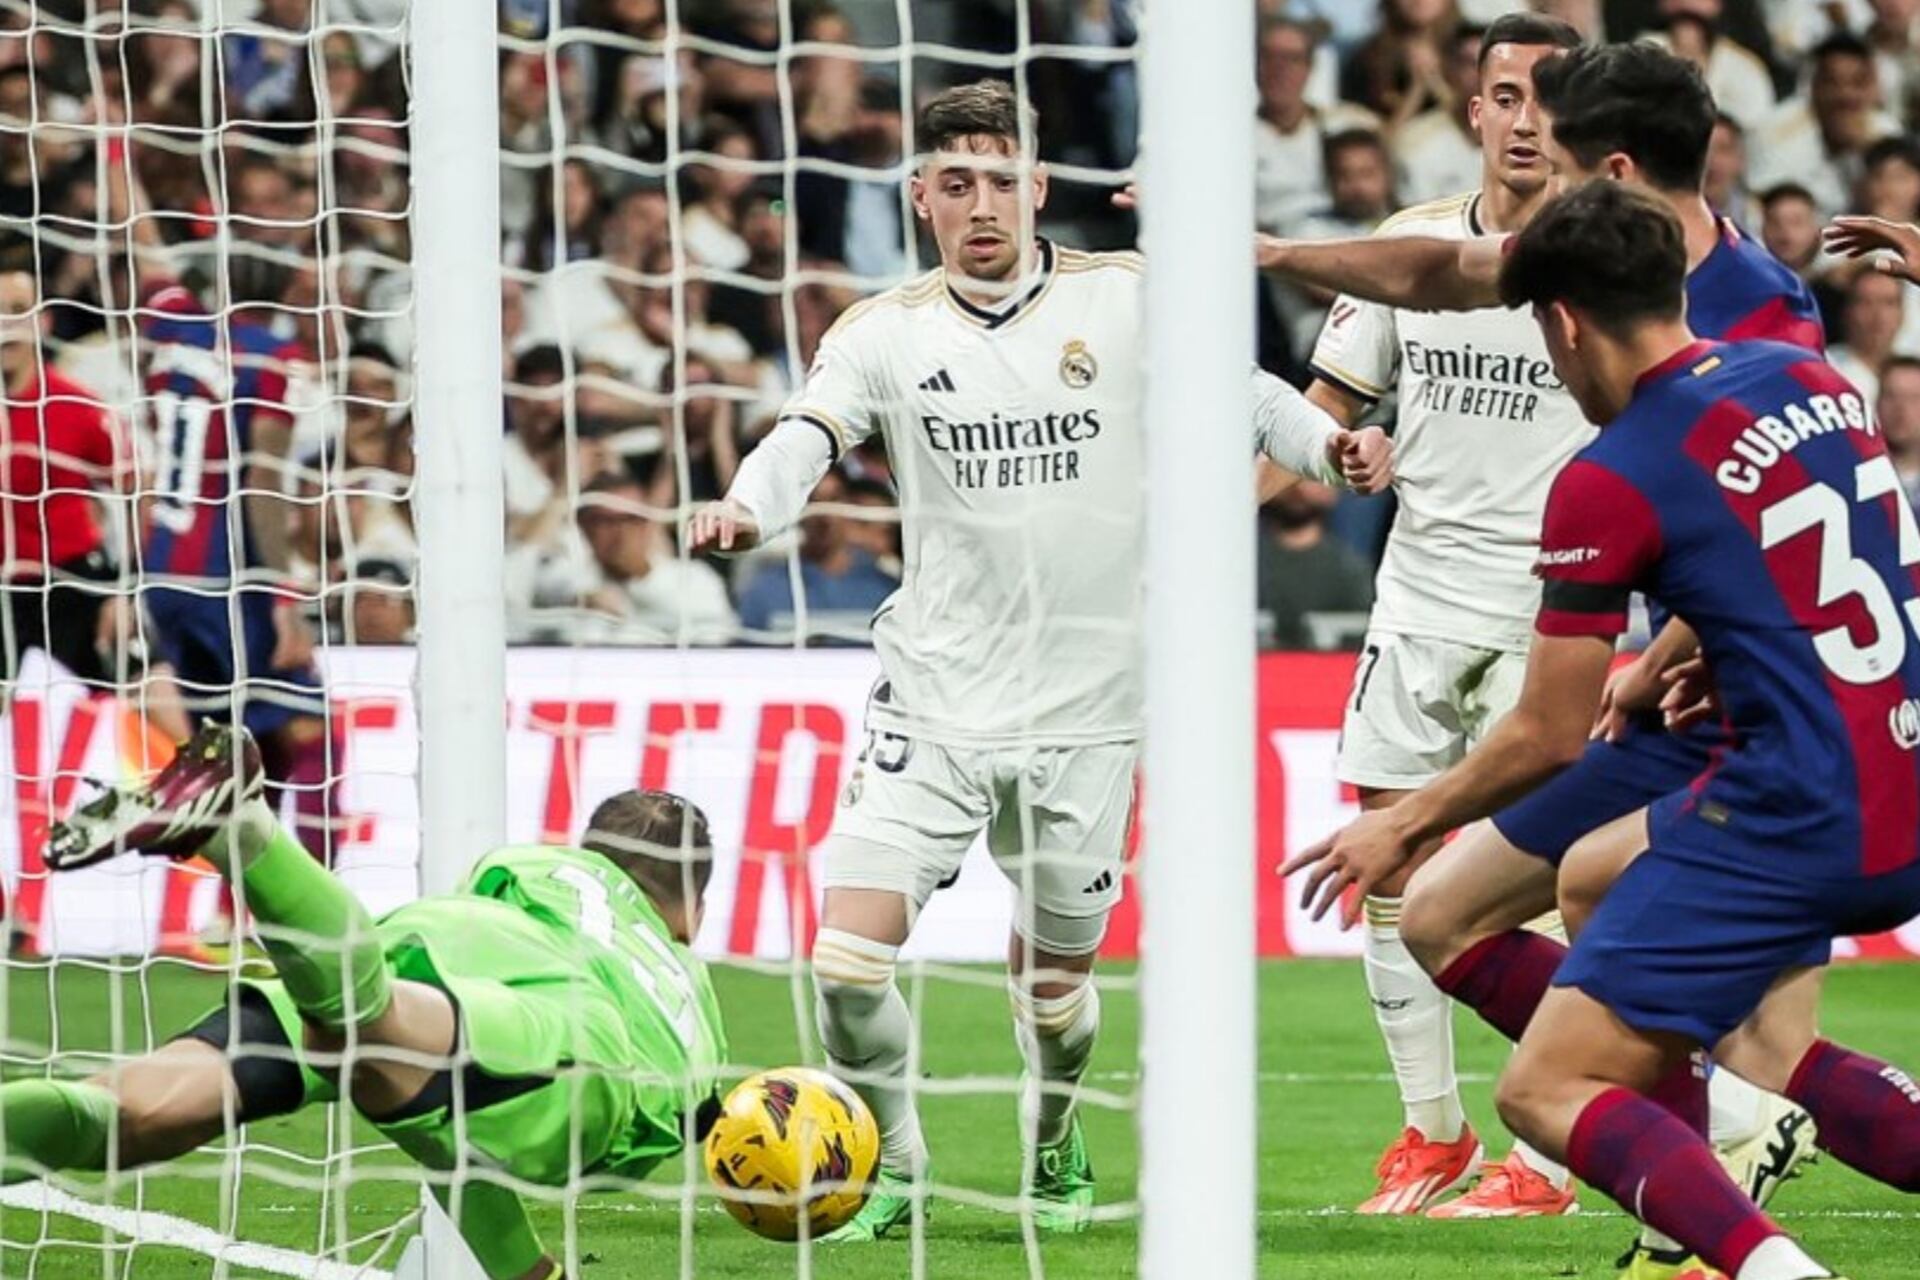 It was a goal, the picture that demonstrates it was a legal goal for Barcelona vs Real Madrid 